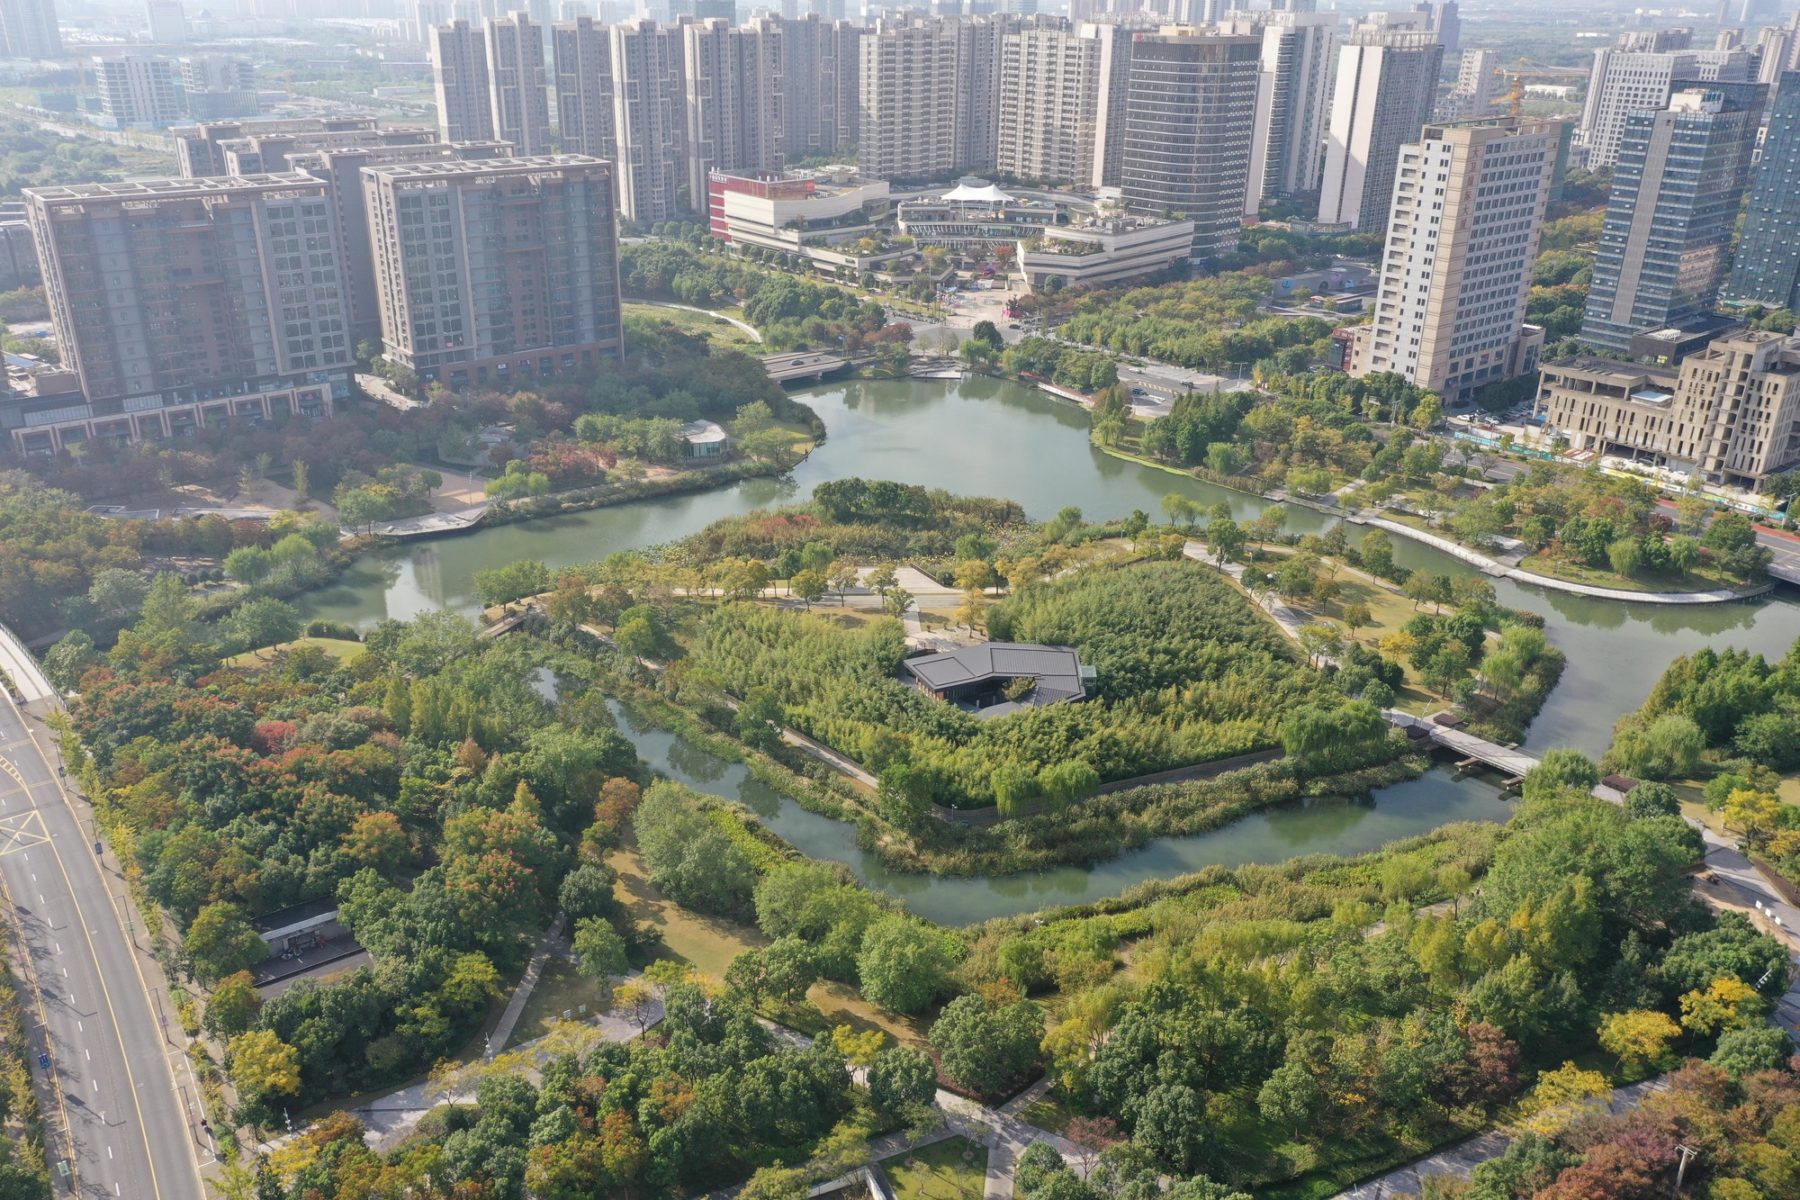 aerial photo of park looking back towards the surrounding city